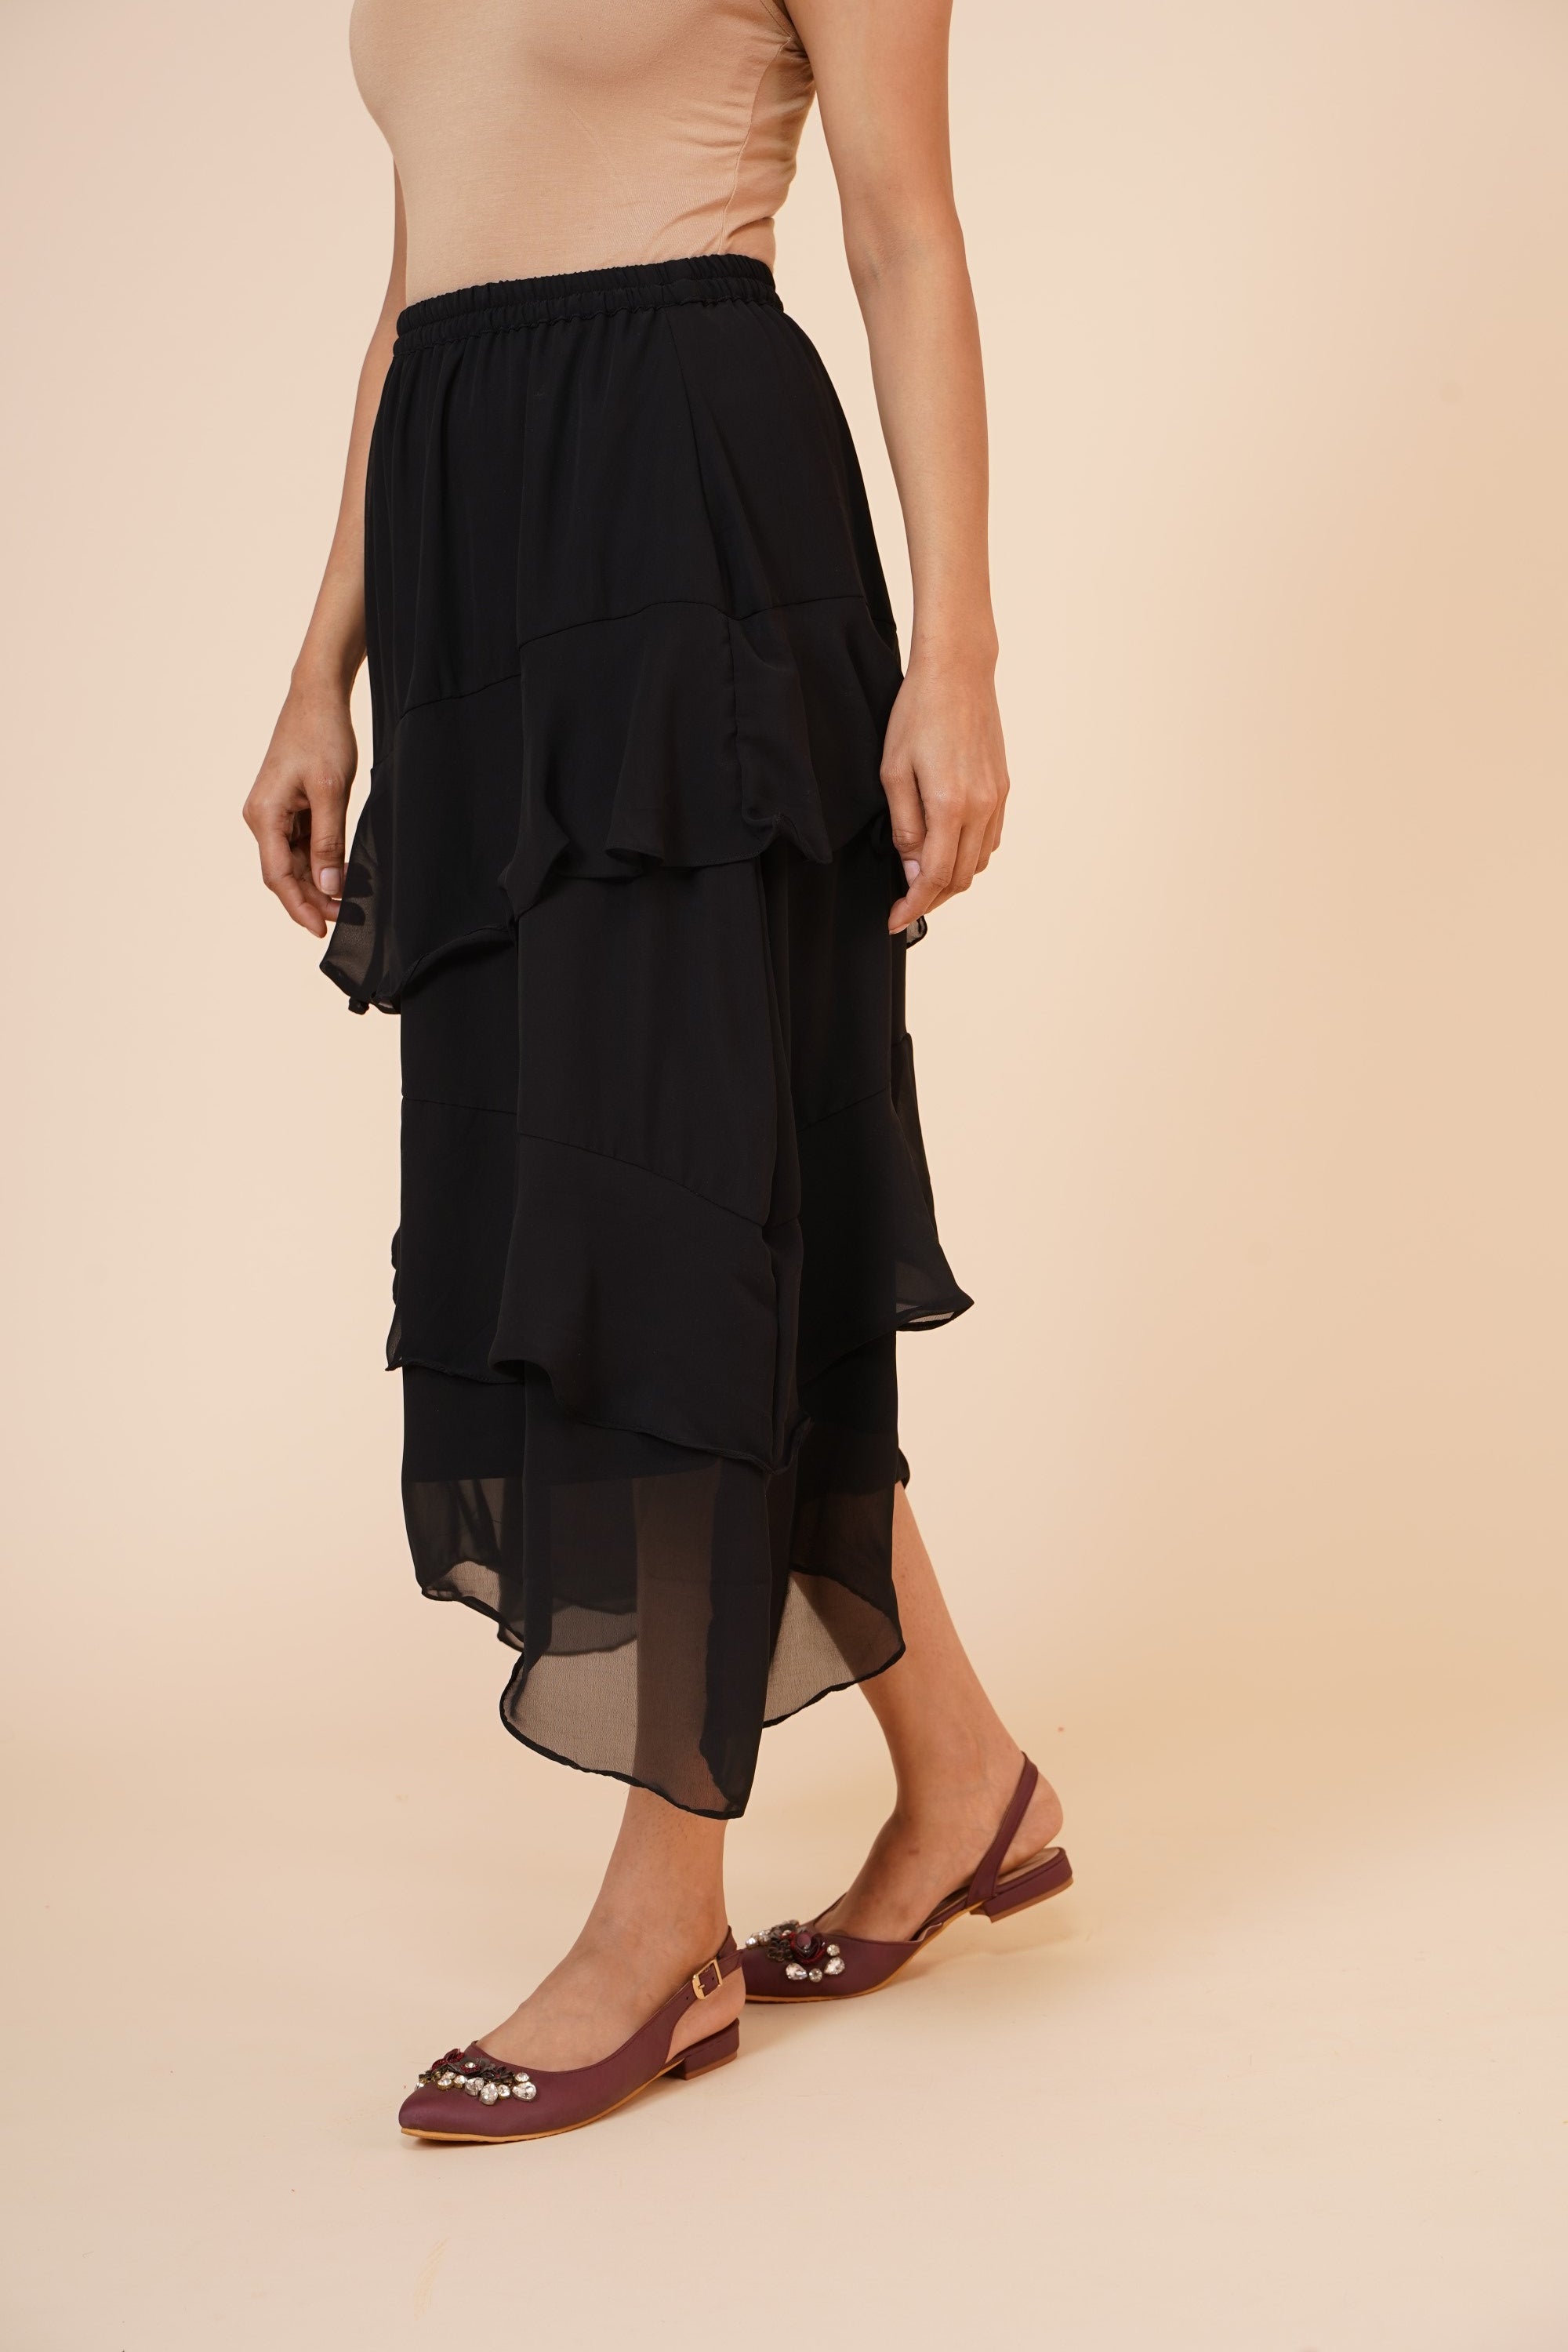 Women's Chiffon Ruffle Skirt With Elastic In Black  - MIRACOLOS by Ruchi